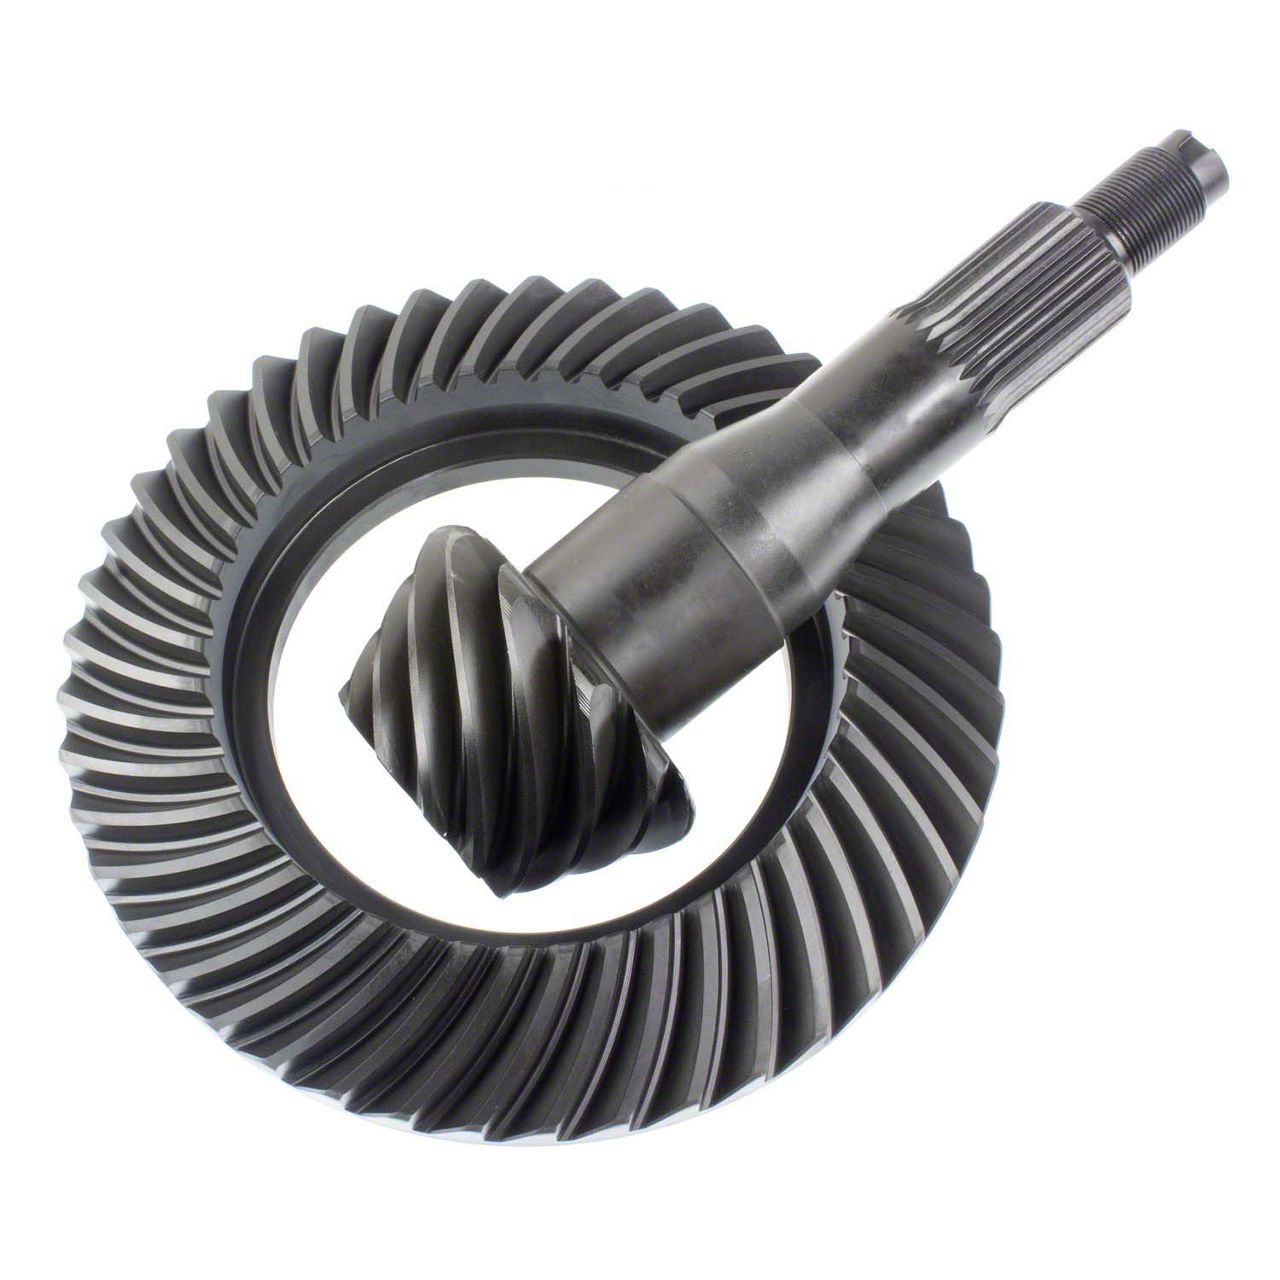 Ford 8.8" F150 Mustang Rearend 5.13 Ring and Pinion USA Standard Gear Set